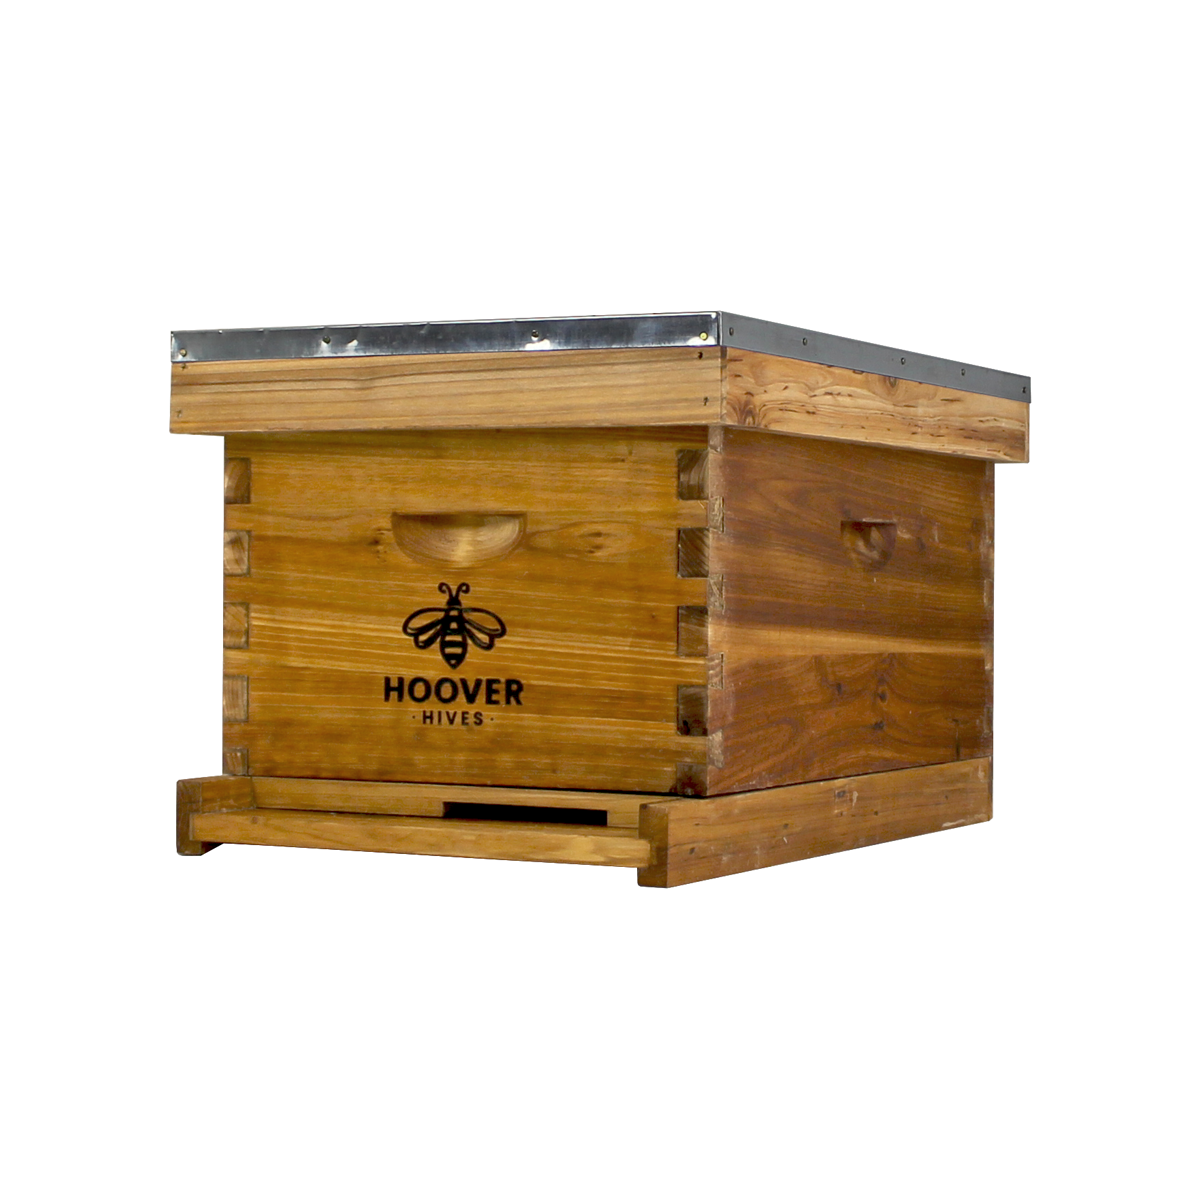 Hoover Hives Wax Coated 8 Frame Beehive With 1 Deep Bee Box